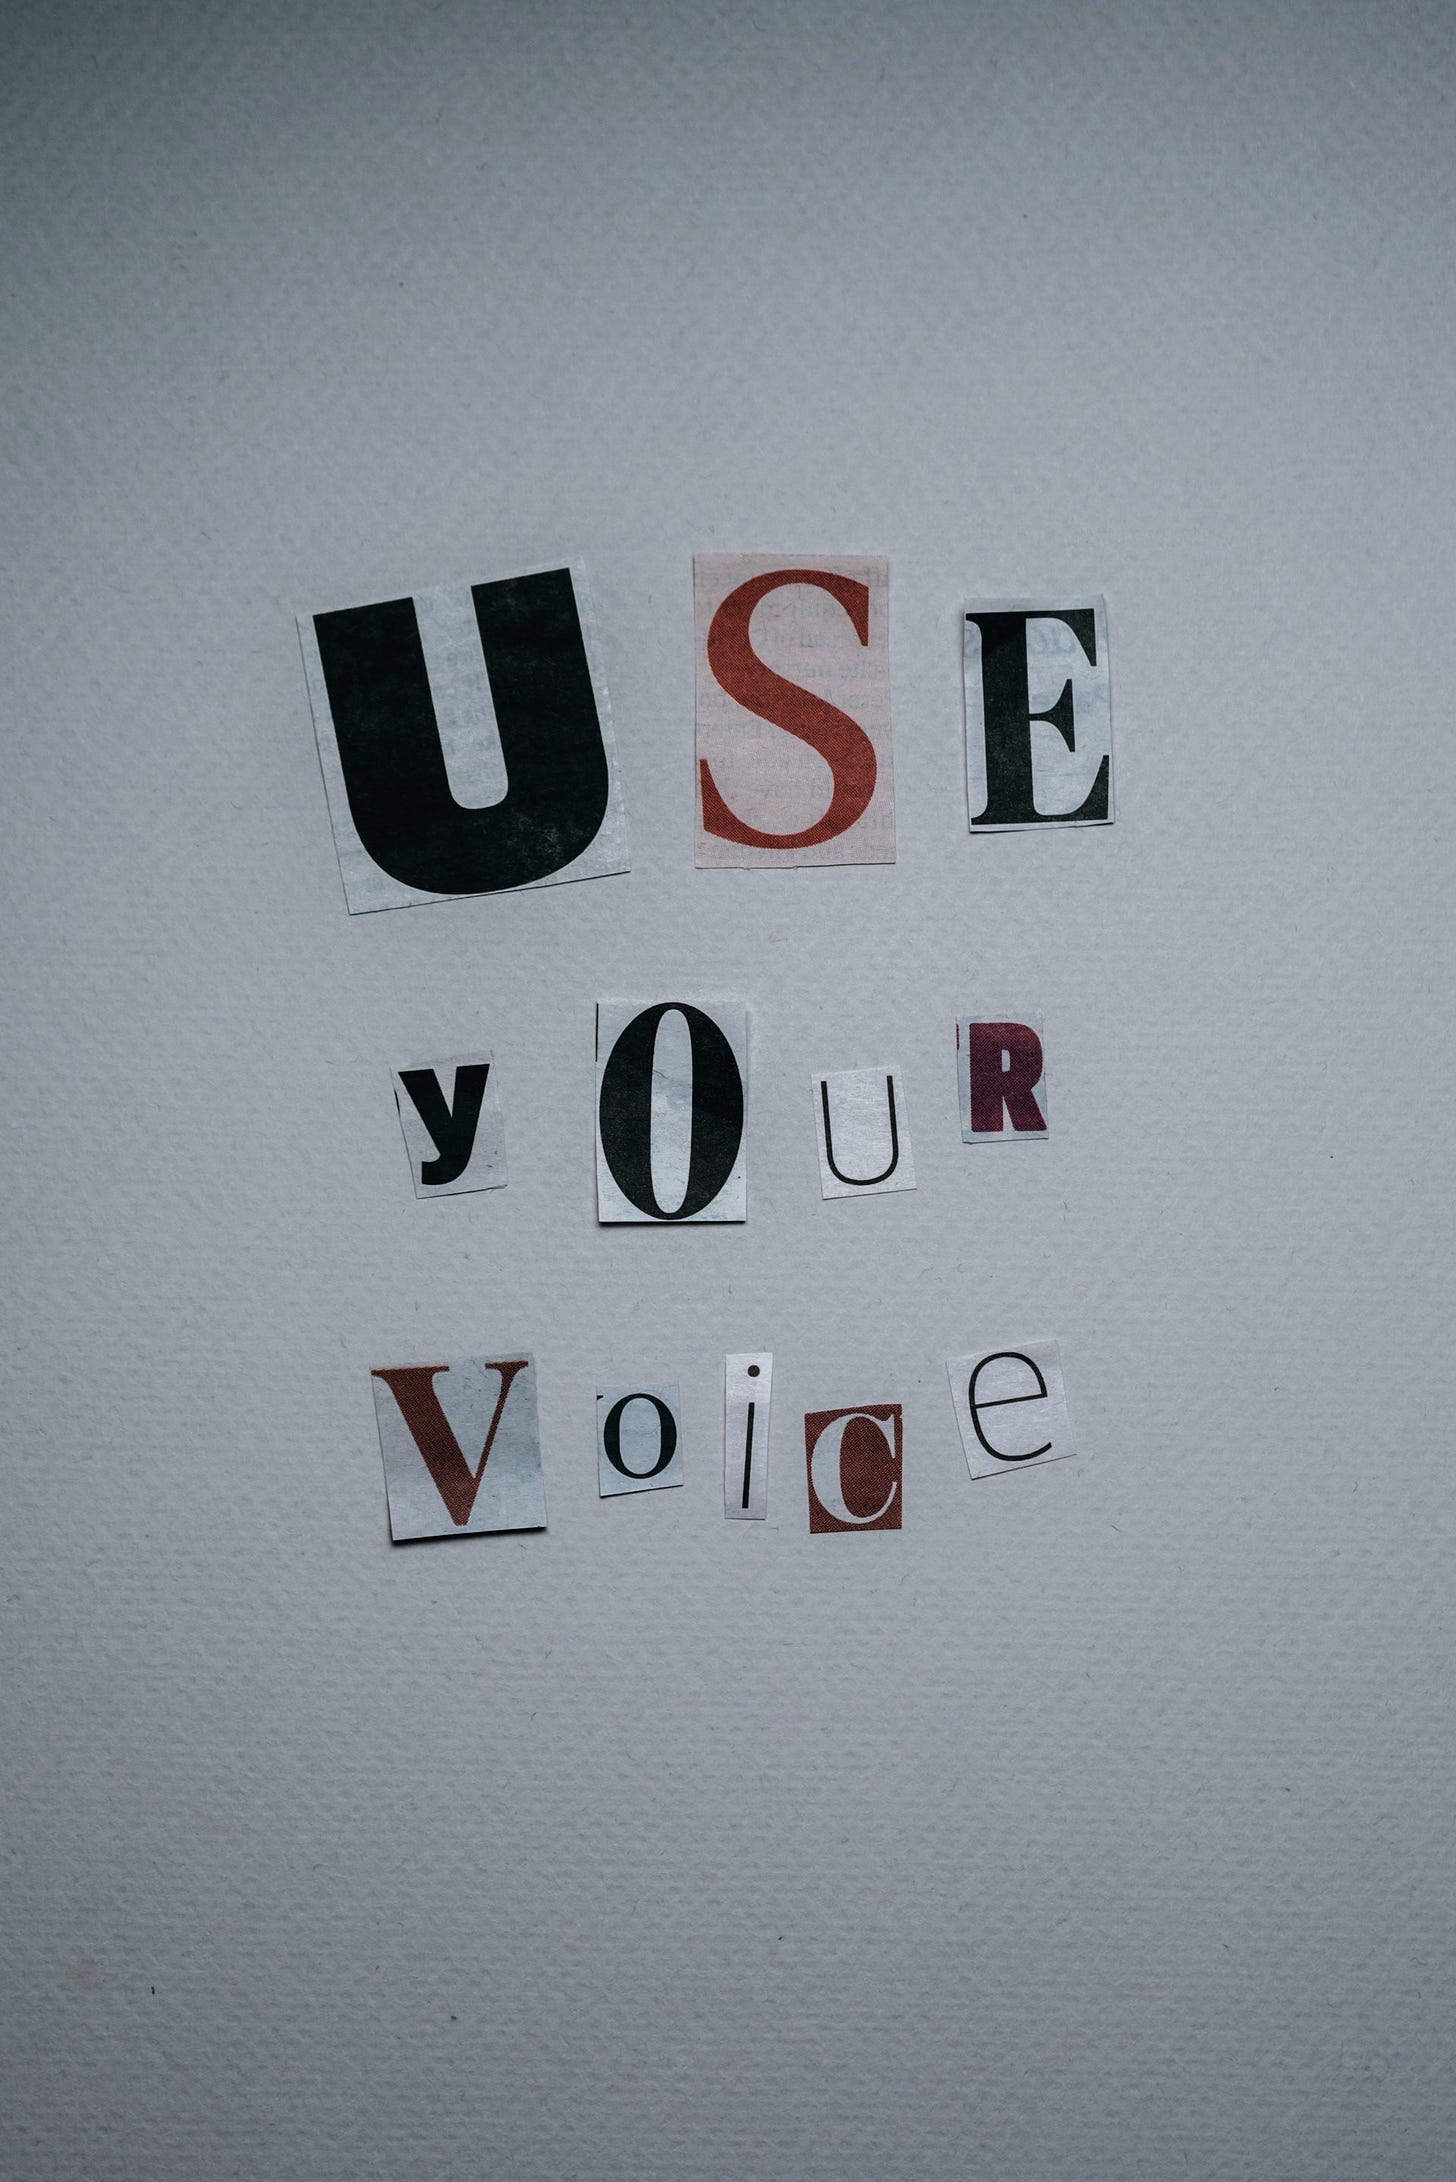 “Use your voice” 📸:Polina KovalevaKeep "Doing the Most:" 7 tips on How to be Your Most Authentic, Confident Self + "Material Gworl" Pinterest Ad: Intro to my upcoming course, Keesh the Biz Healer, to learn how to build your own Authentic brand